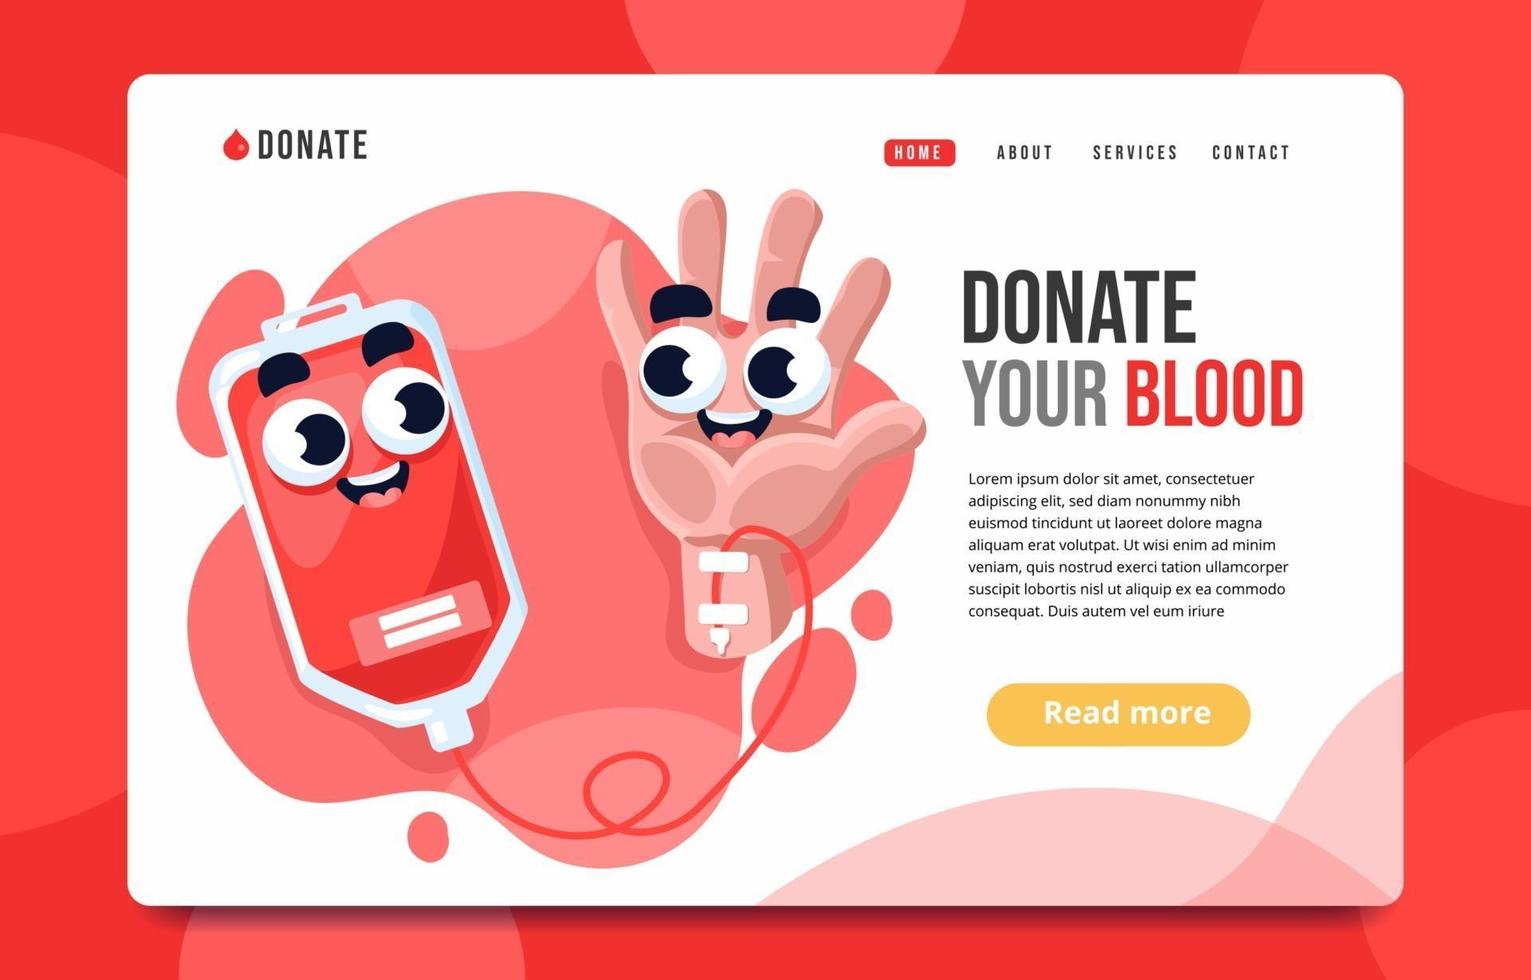 Fun in Blood Donation Infographic vector